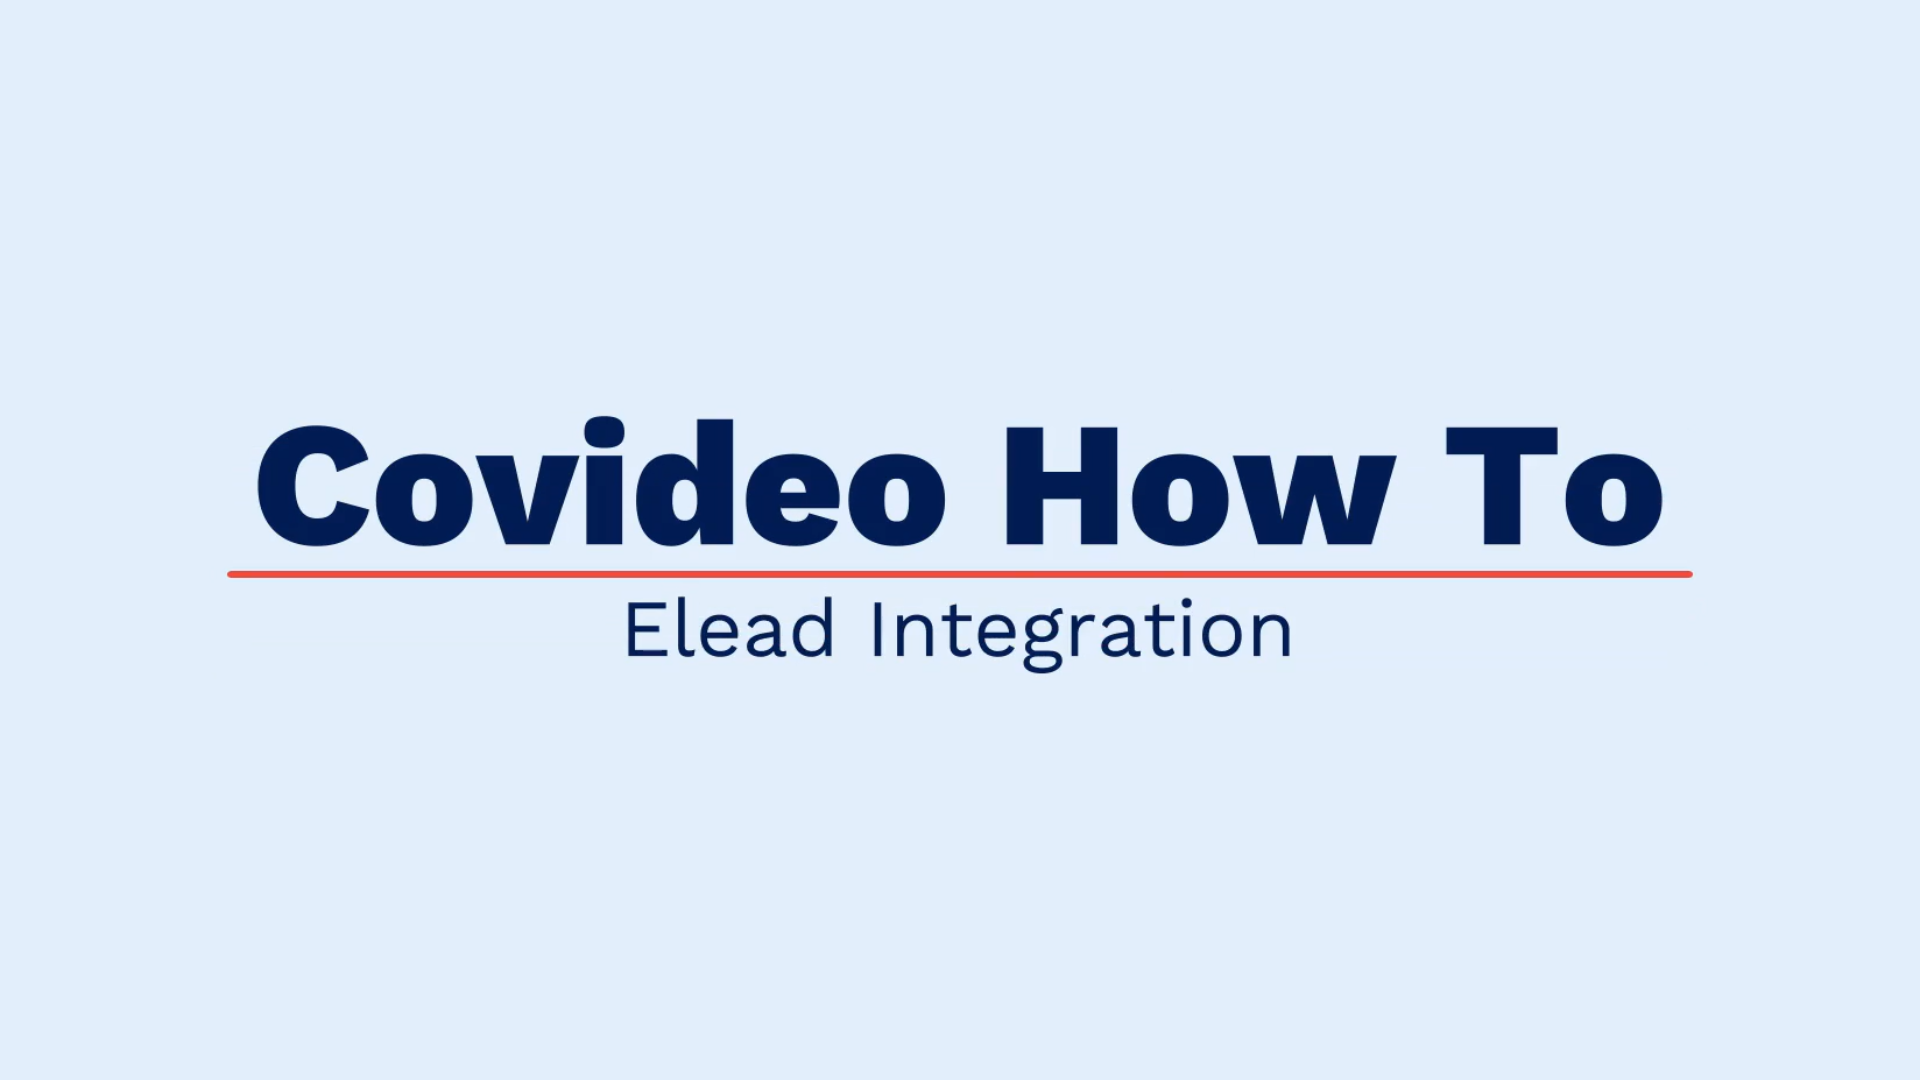 How To: Elead Integration